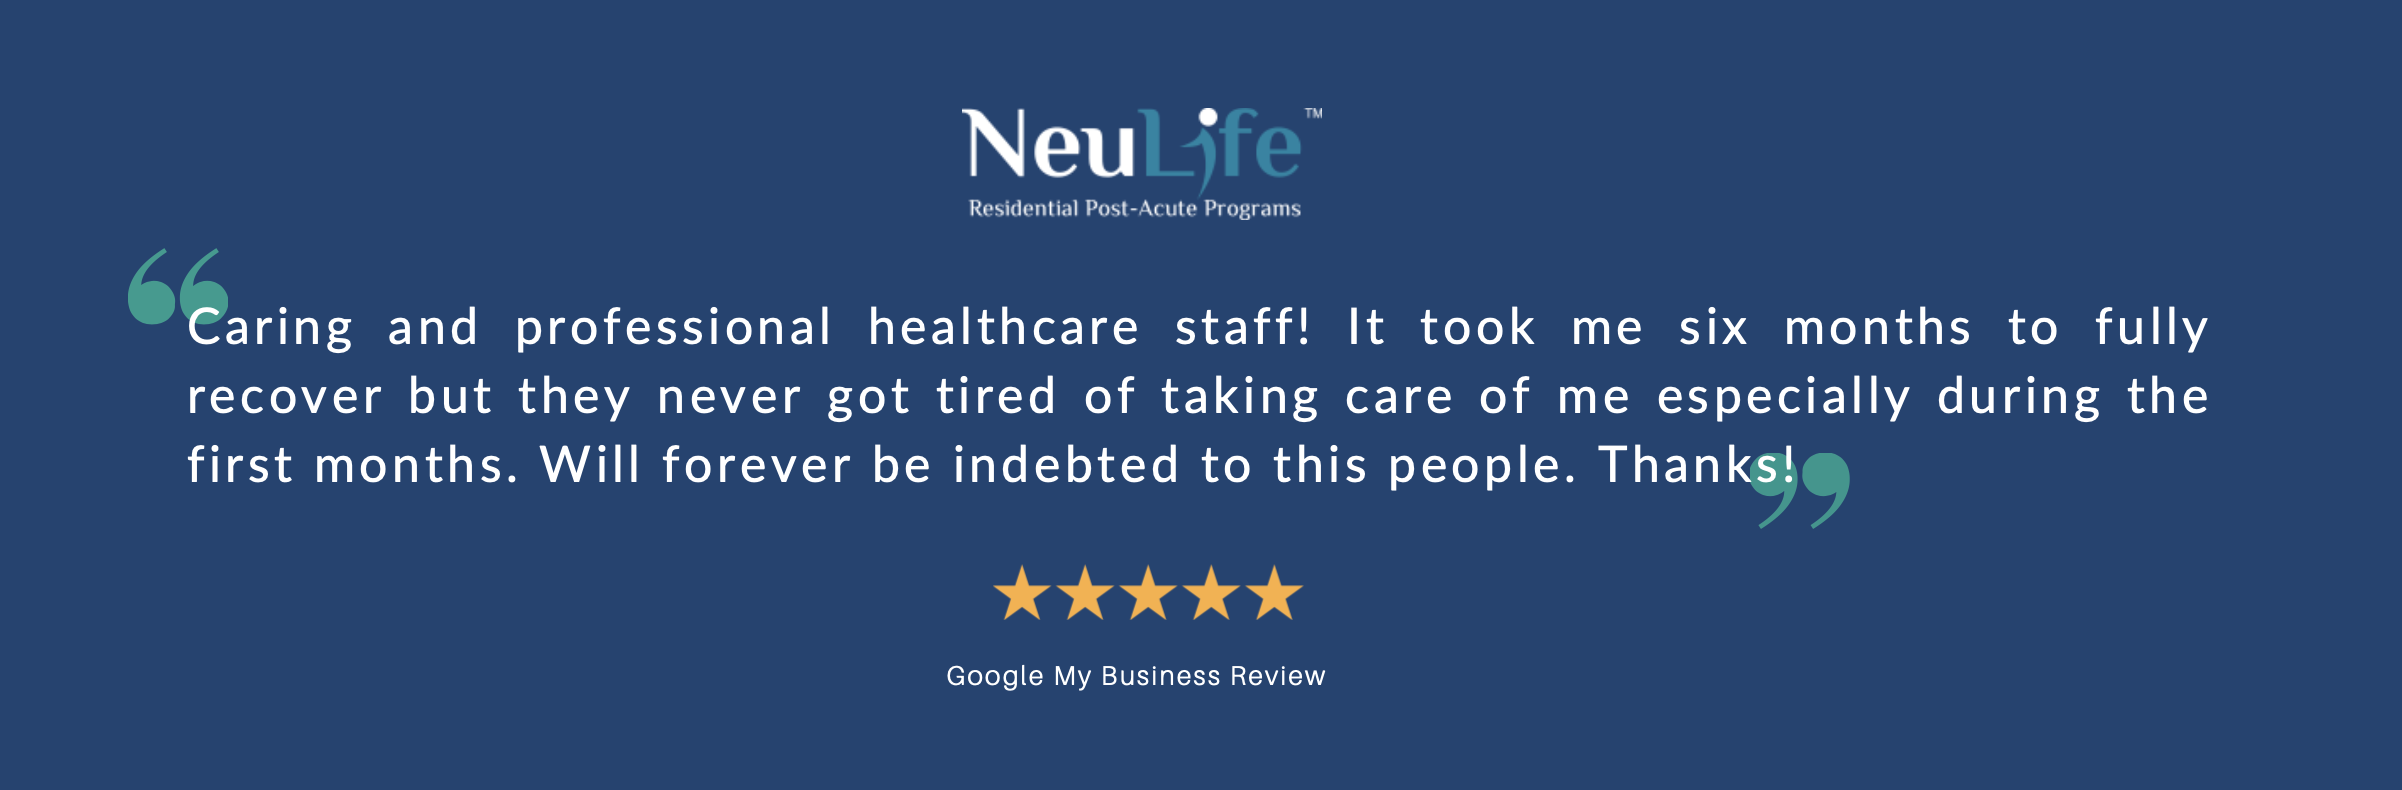 NeuLife online reviews